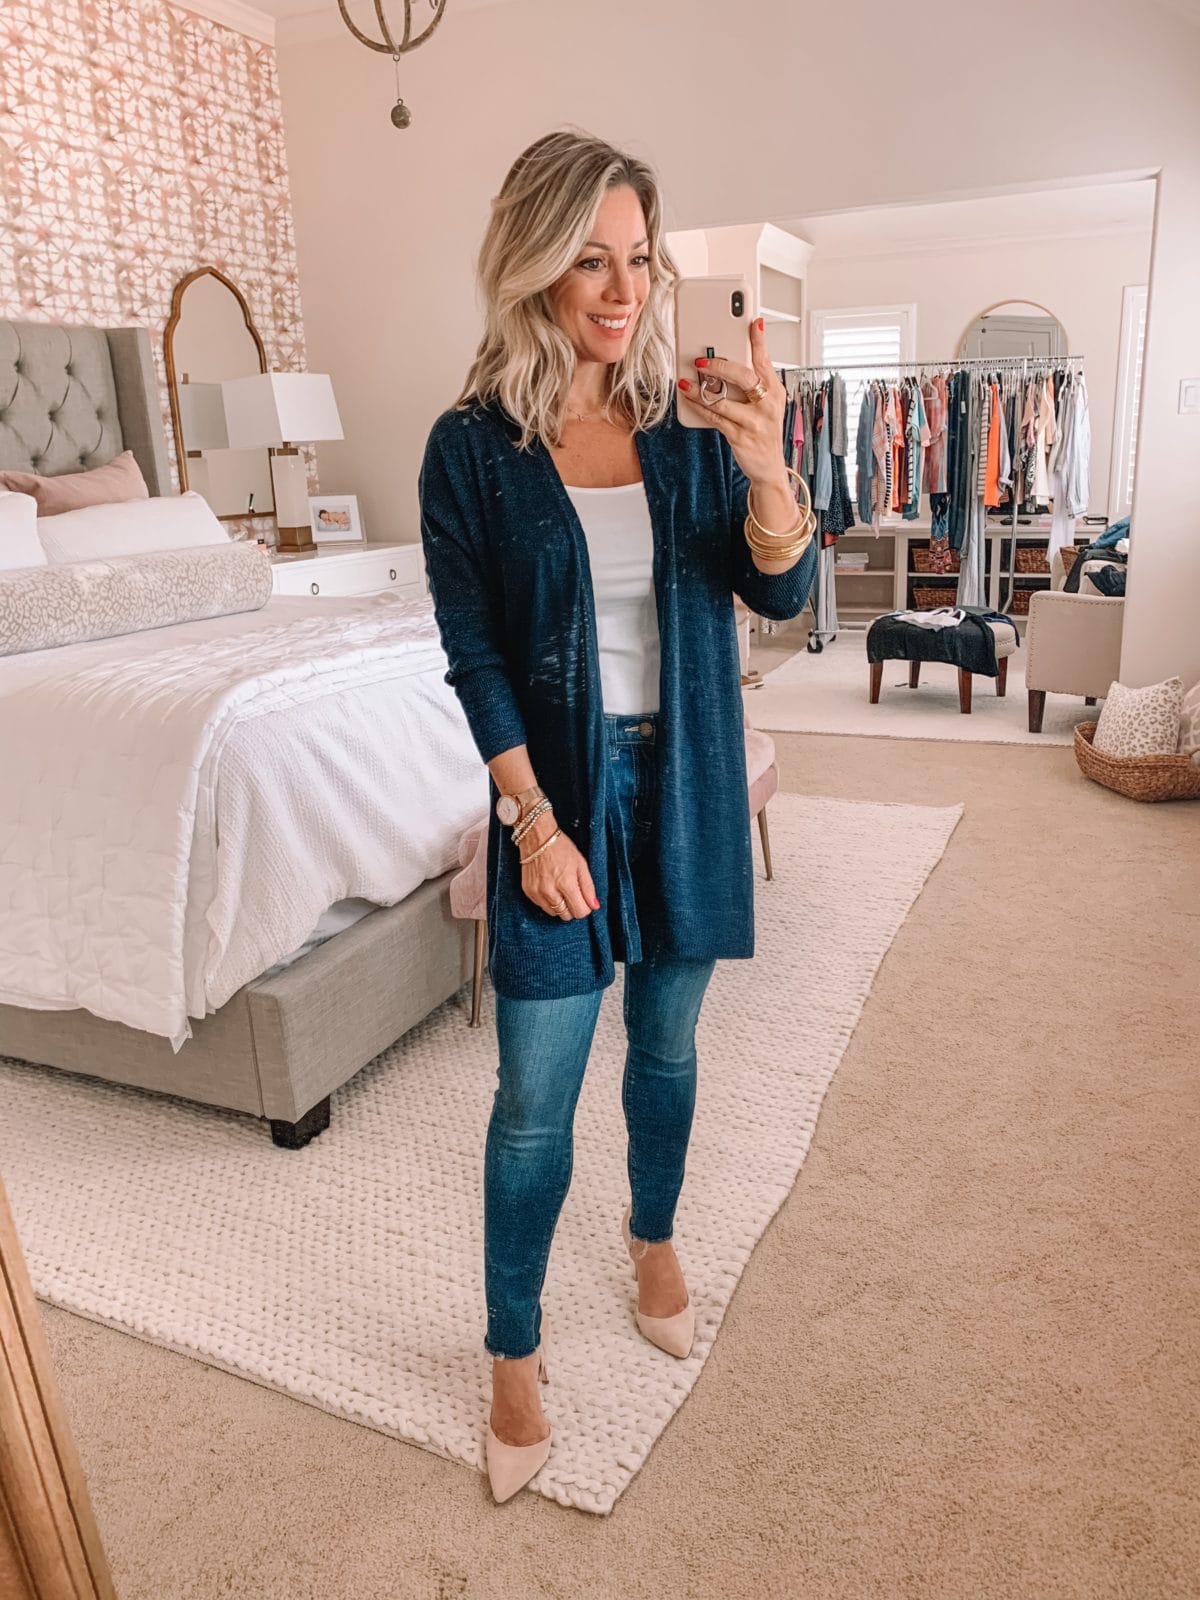 Amazon Fashion Finds, Jeans, Navy Cardigan, Heels 